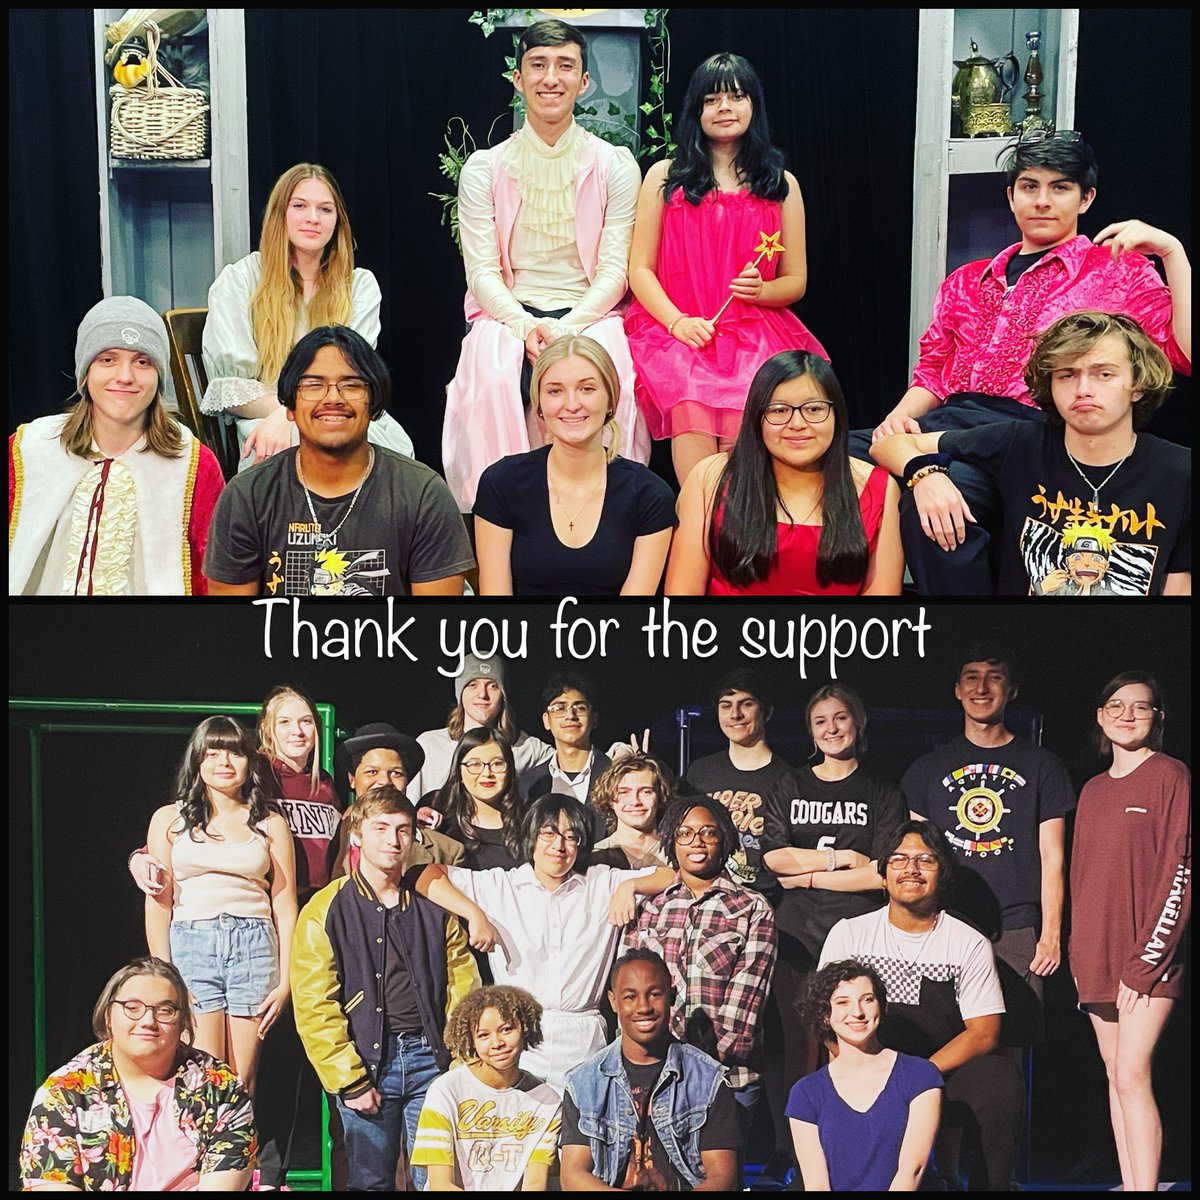 The Mother's Day weekend performances were so great. It was wonderful to have everyone in the audience. Thank you for supporting the kids in all that they do here at Western Hills ! We look forward to seeing you next year!